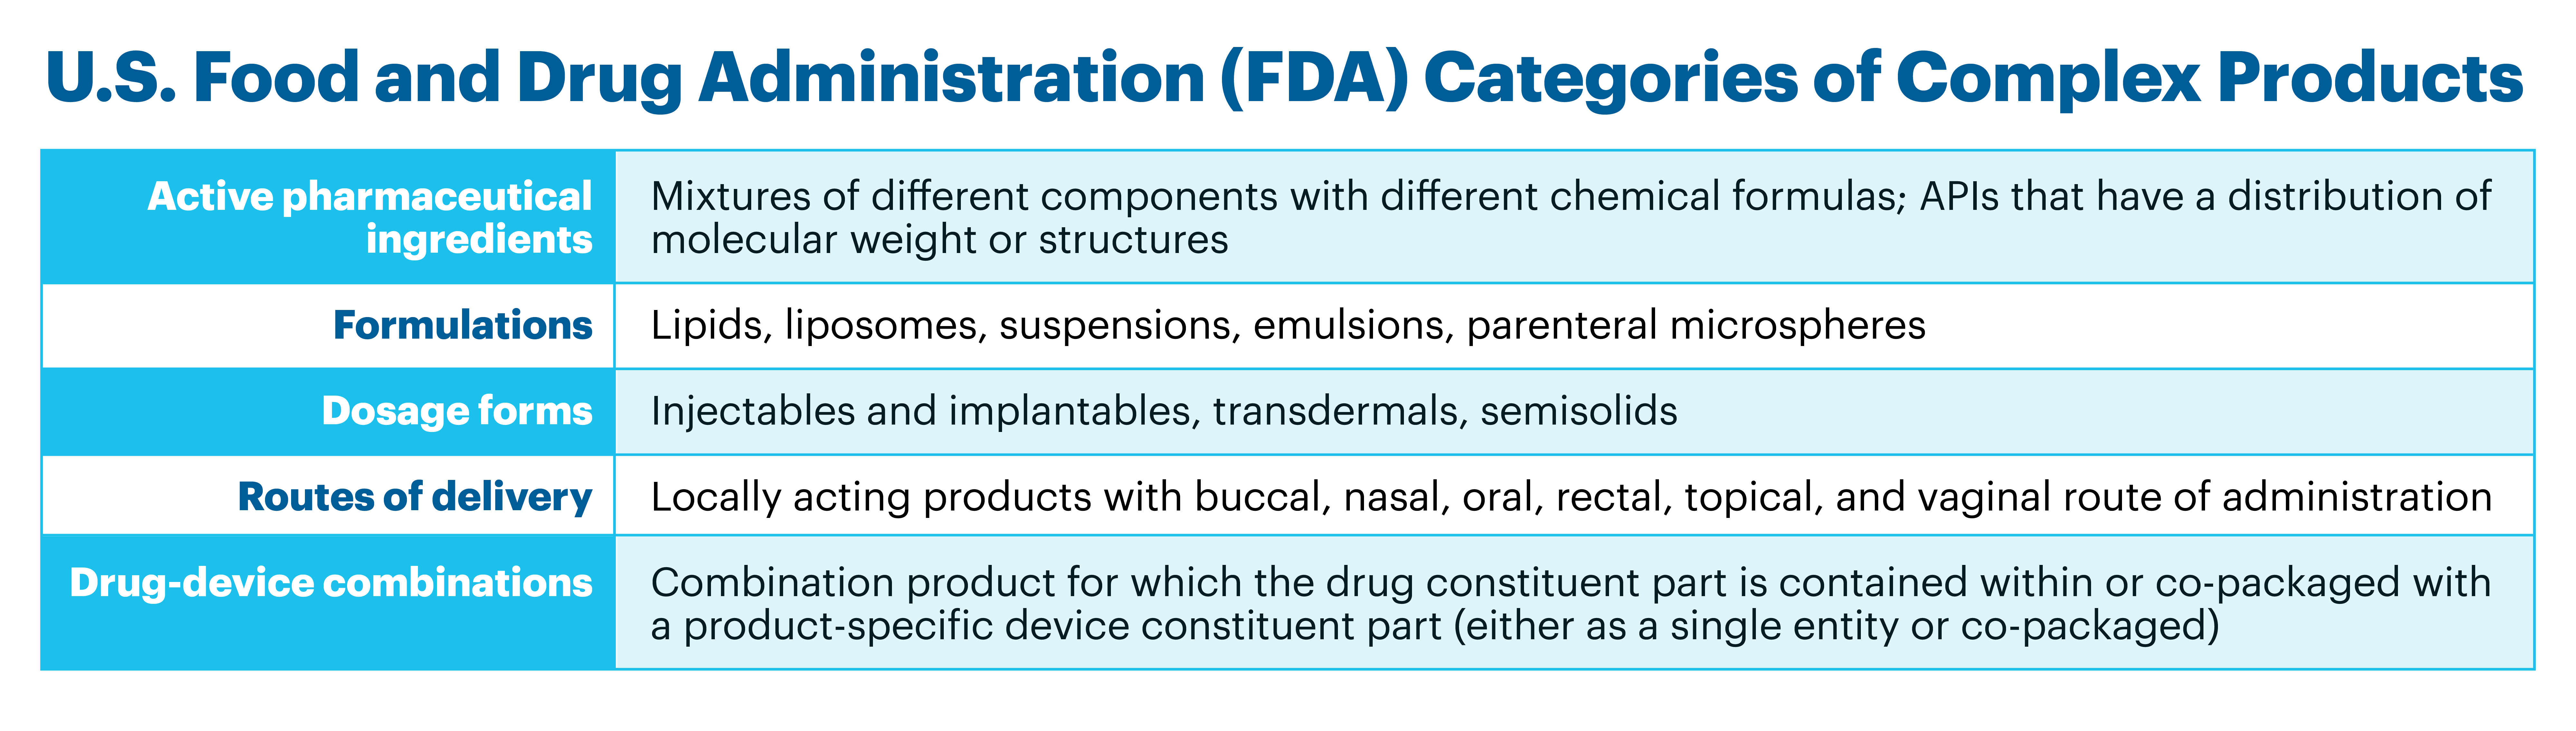 U.S. Food and Drug Administration (FDA) Categories of Complex Products, Quality Matters